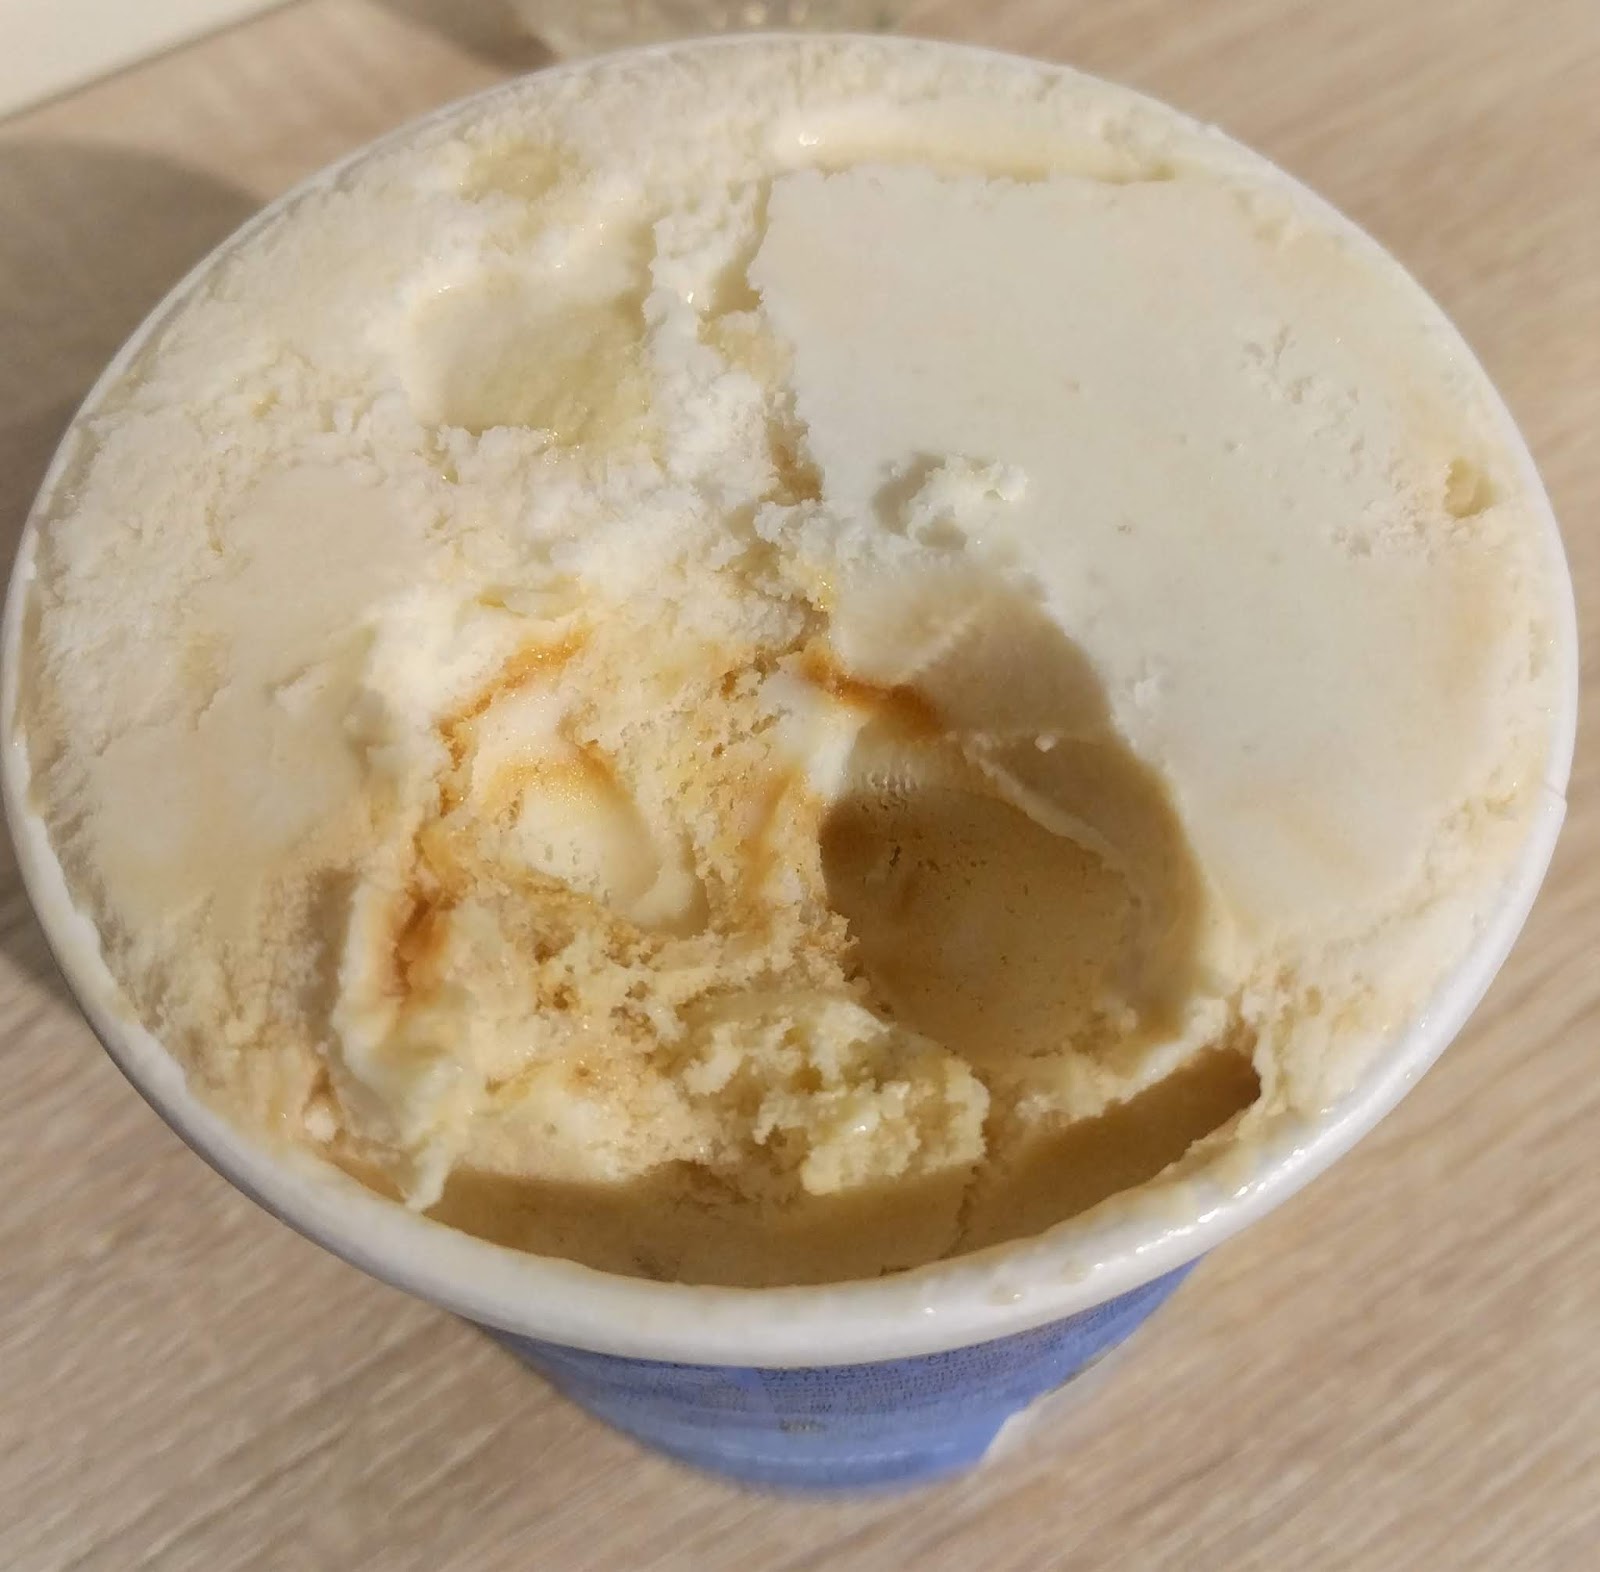 Diets And Calories Ben Jerry S Salted Caramel Brownie Ice Cream